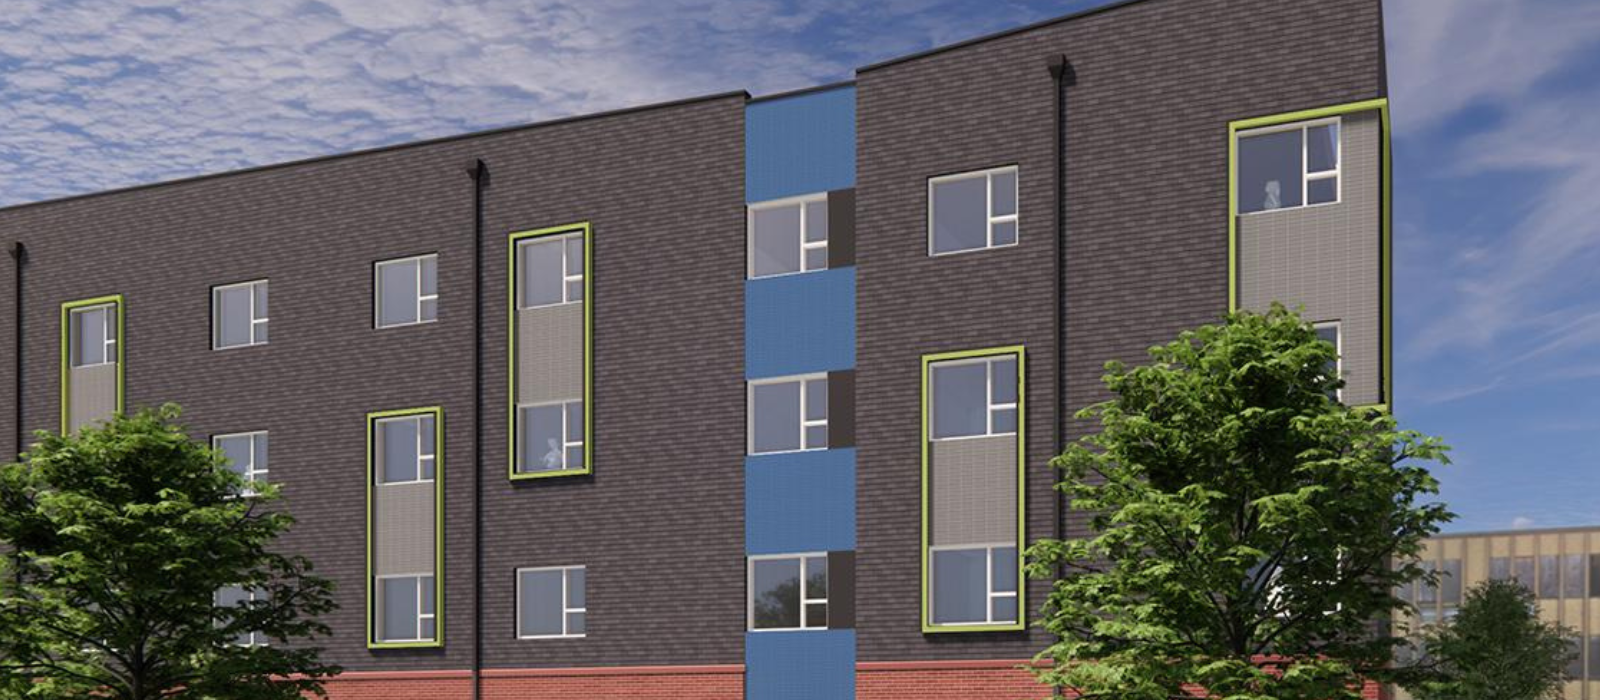 Rendering of the Conservatory Apartments, a 4-story apartment building